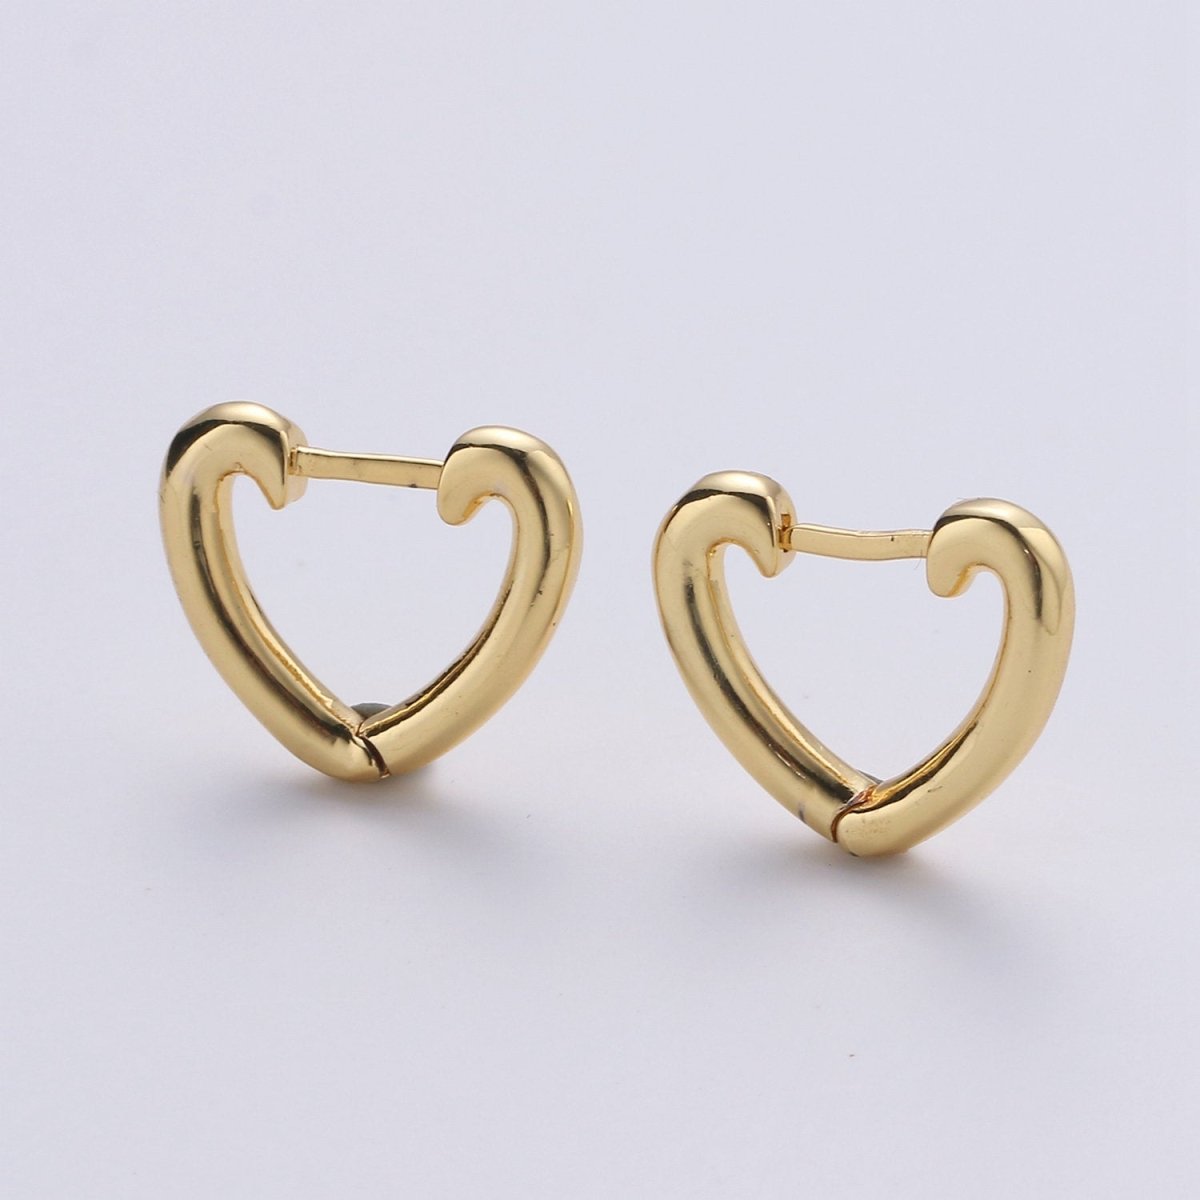 OS Dainty Gold Heart Hoop Earrings, Small Gold One Touch Hoops, Huggie Love Earring Gift For Her 24k Gold Filled Earring K-649 - DLUXCA